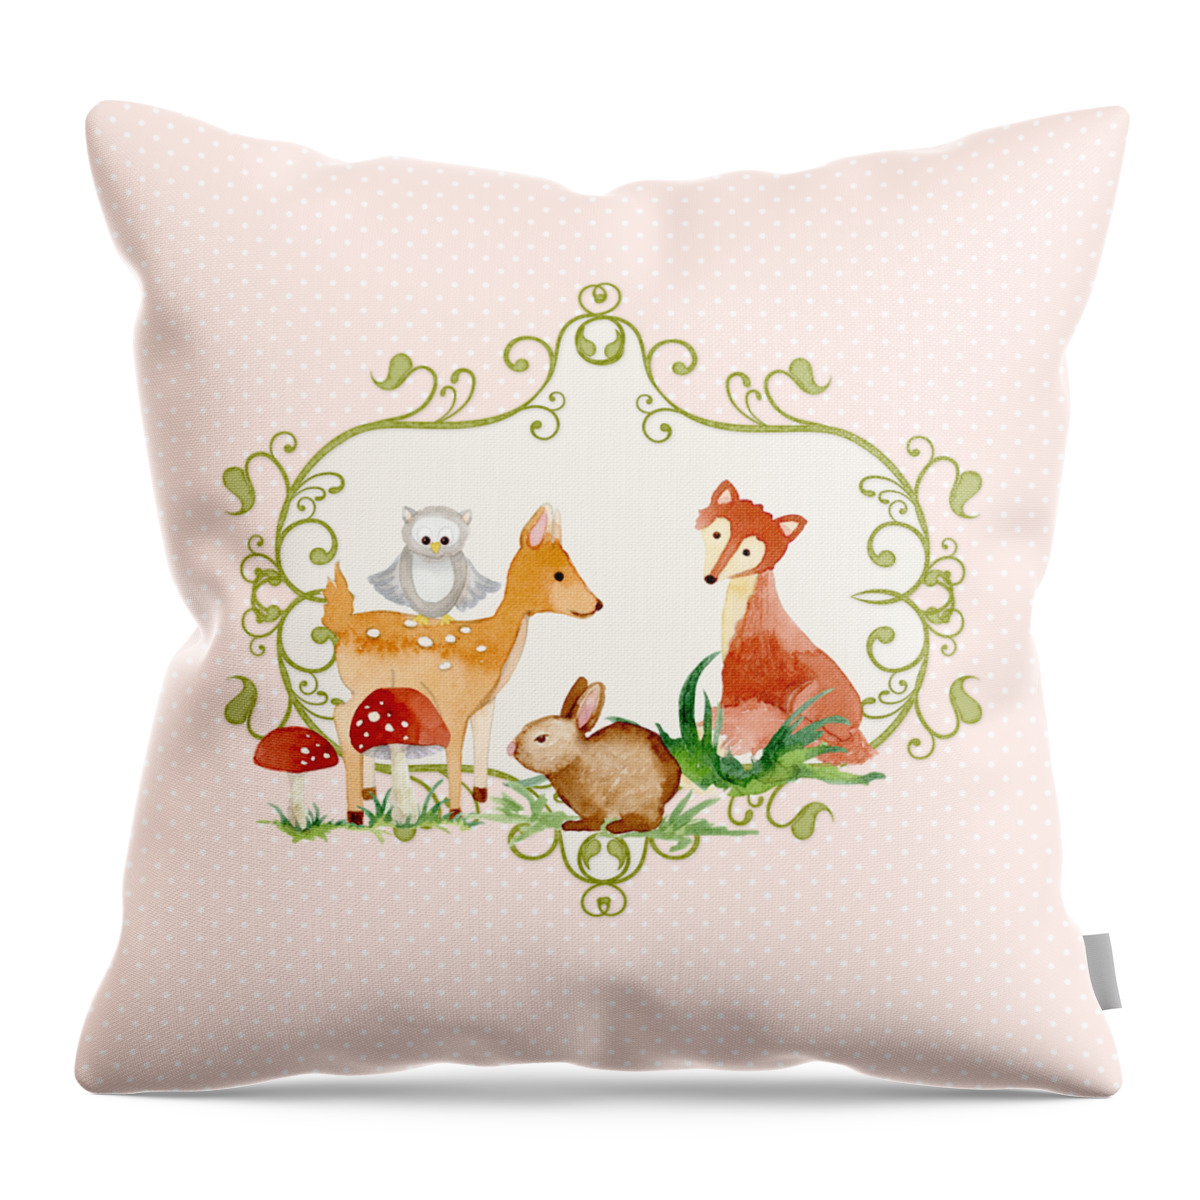 Woodland Throw Pillow featuring the painting Woodland Fairytale - Animals Deer Owl Fox Bunny n Mushrooms by Audrey Jeanne Roberts